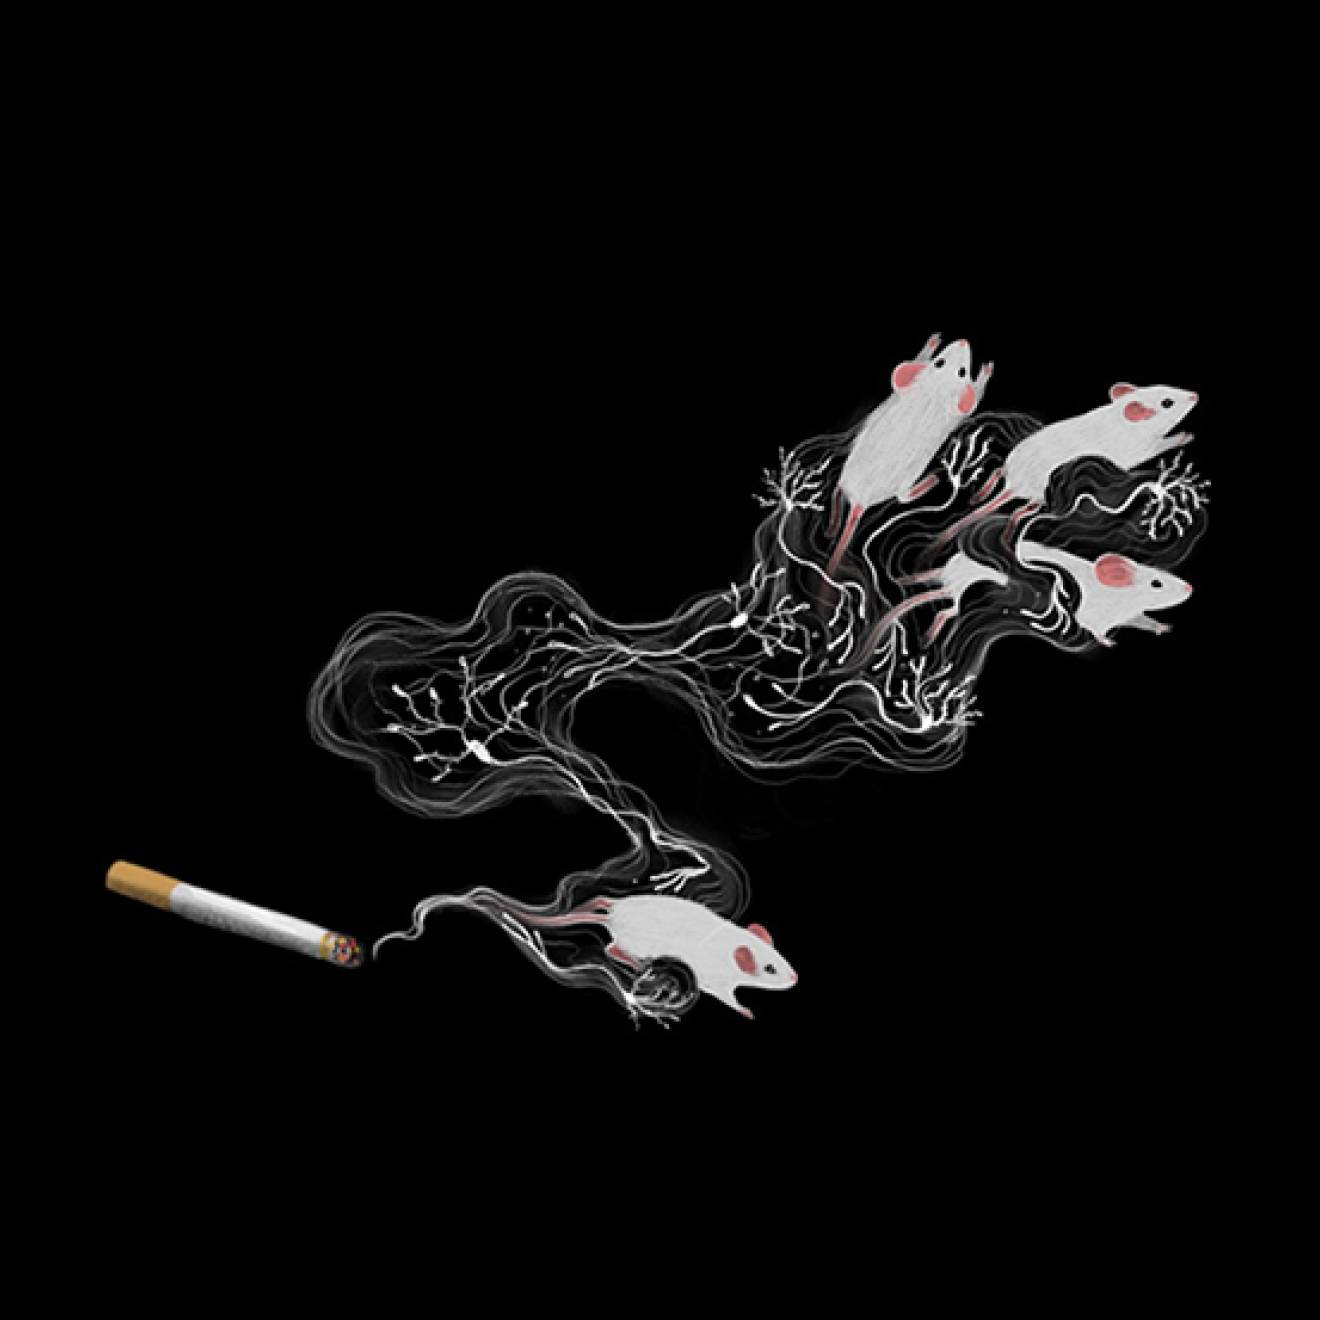 Drawing of mice moving away from a lit cigarette, wrapped in smoke